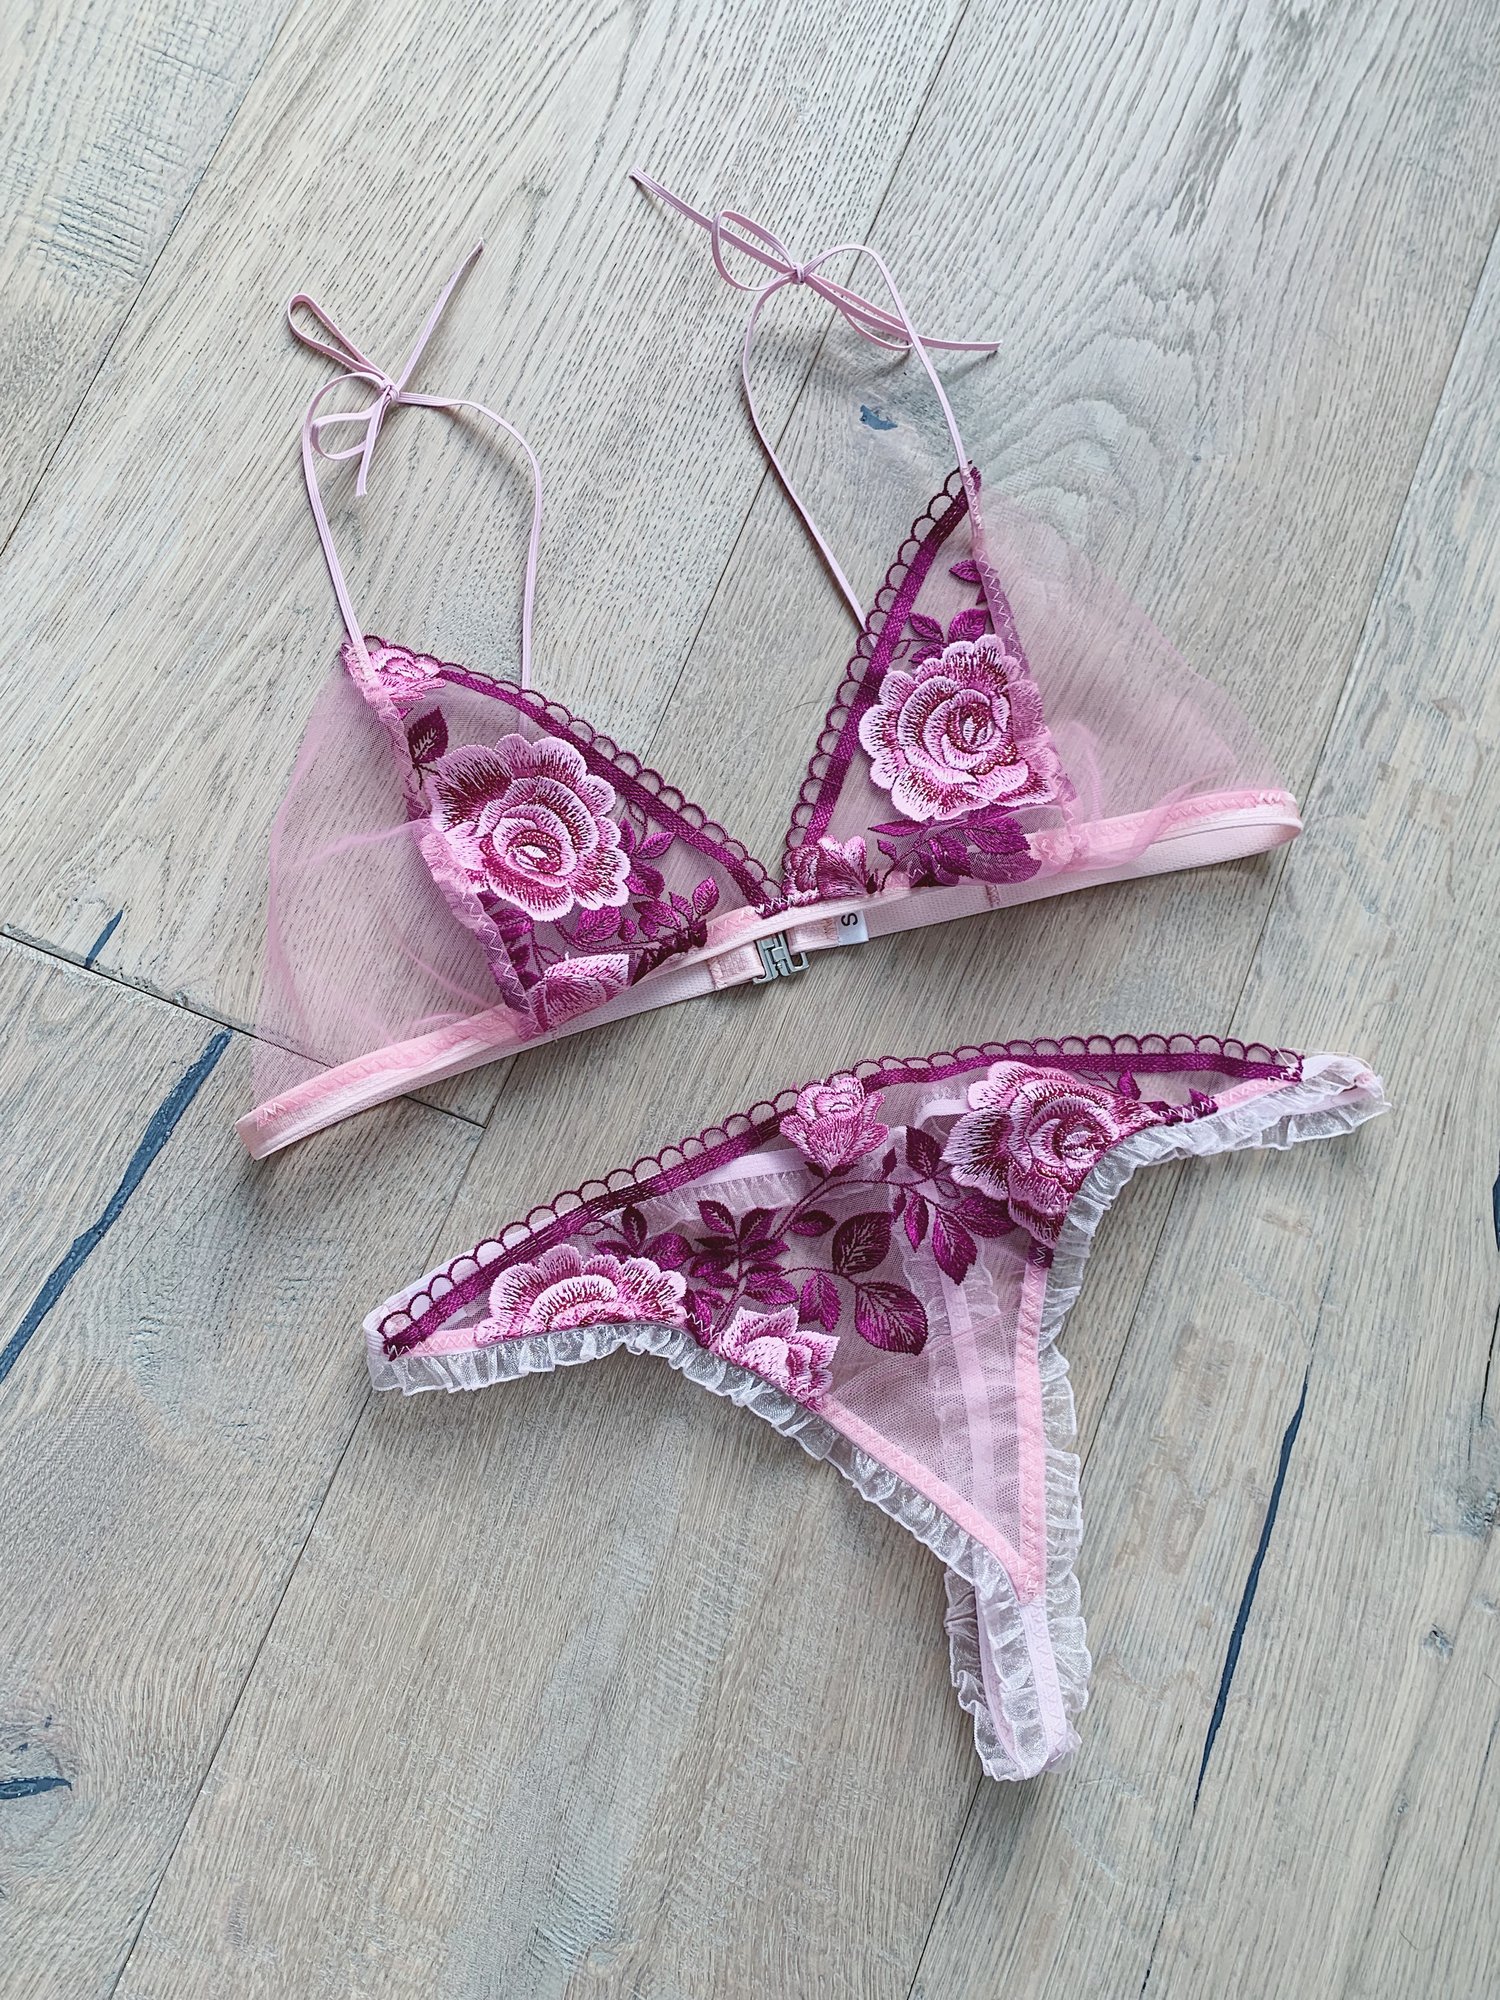 Discover Handcrafted Canadian Lingerie - Your Alternative to Mary